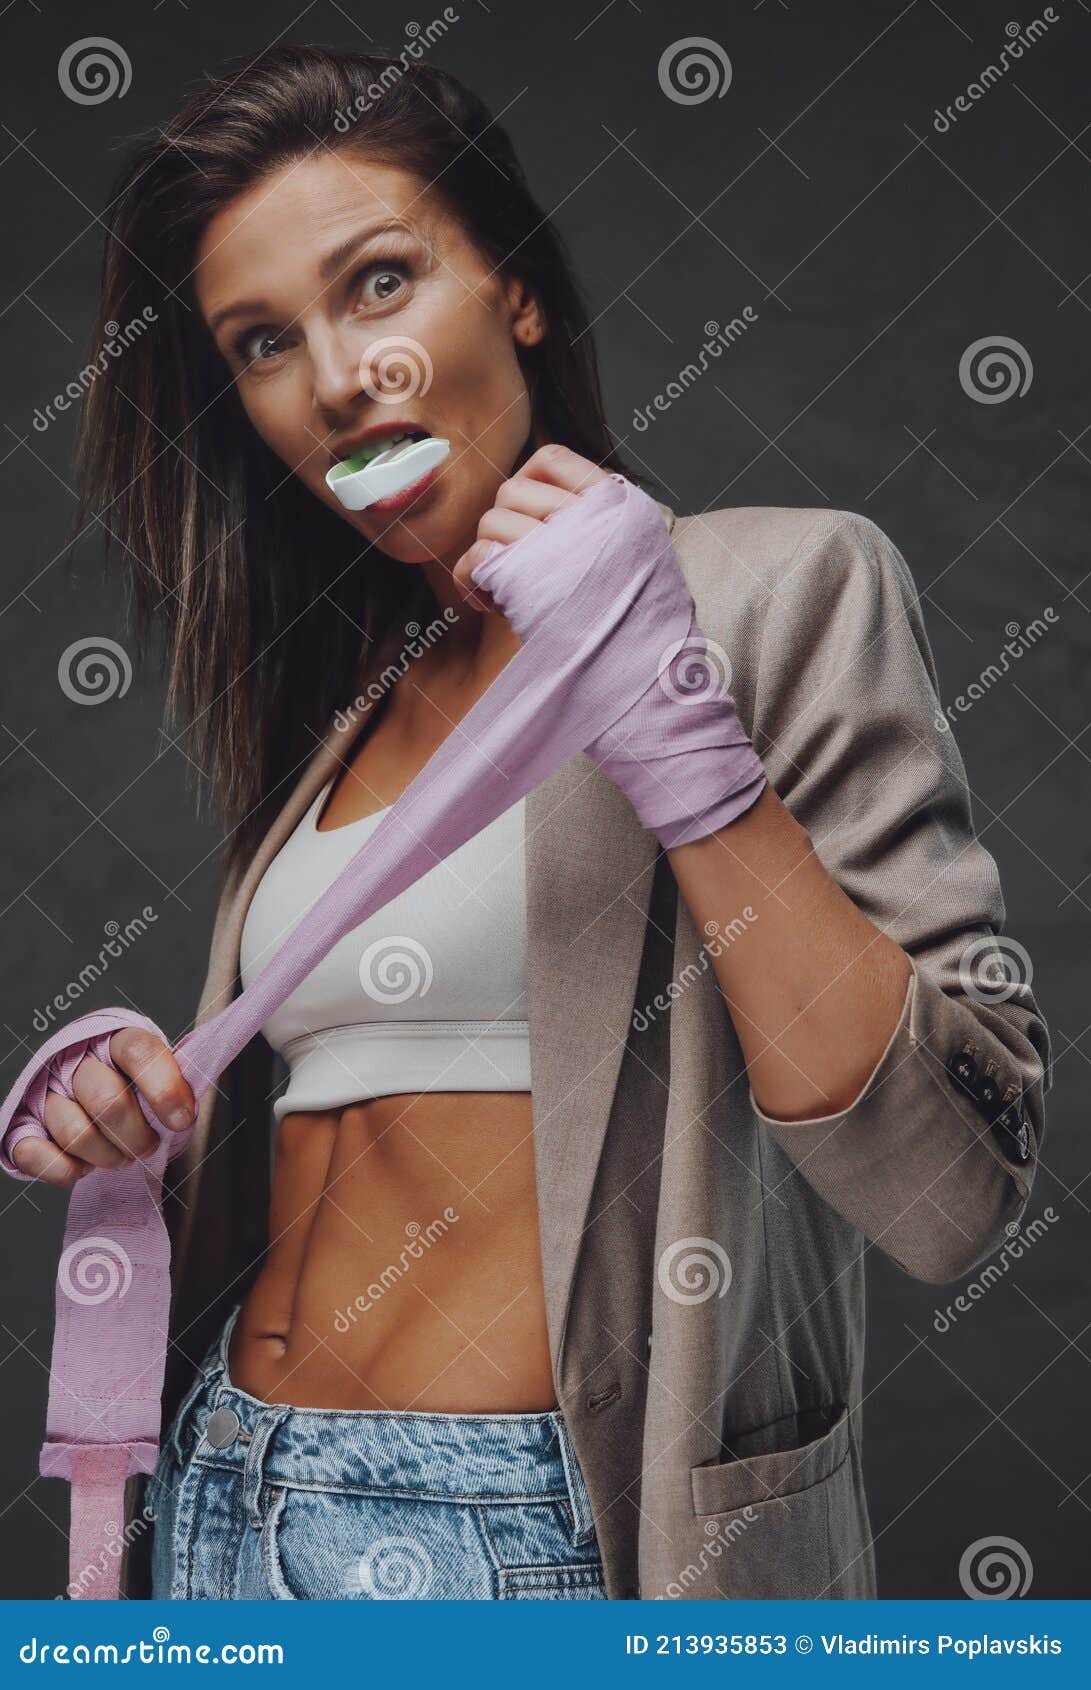 Surprised Sportswoman Pulling Bandage in Dark Background Stock Image -  Image of middleaged, competitive: 213935853